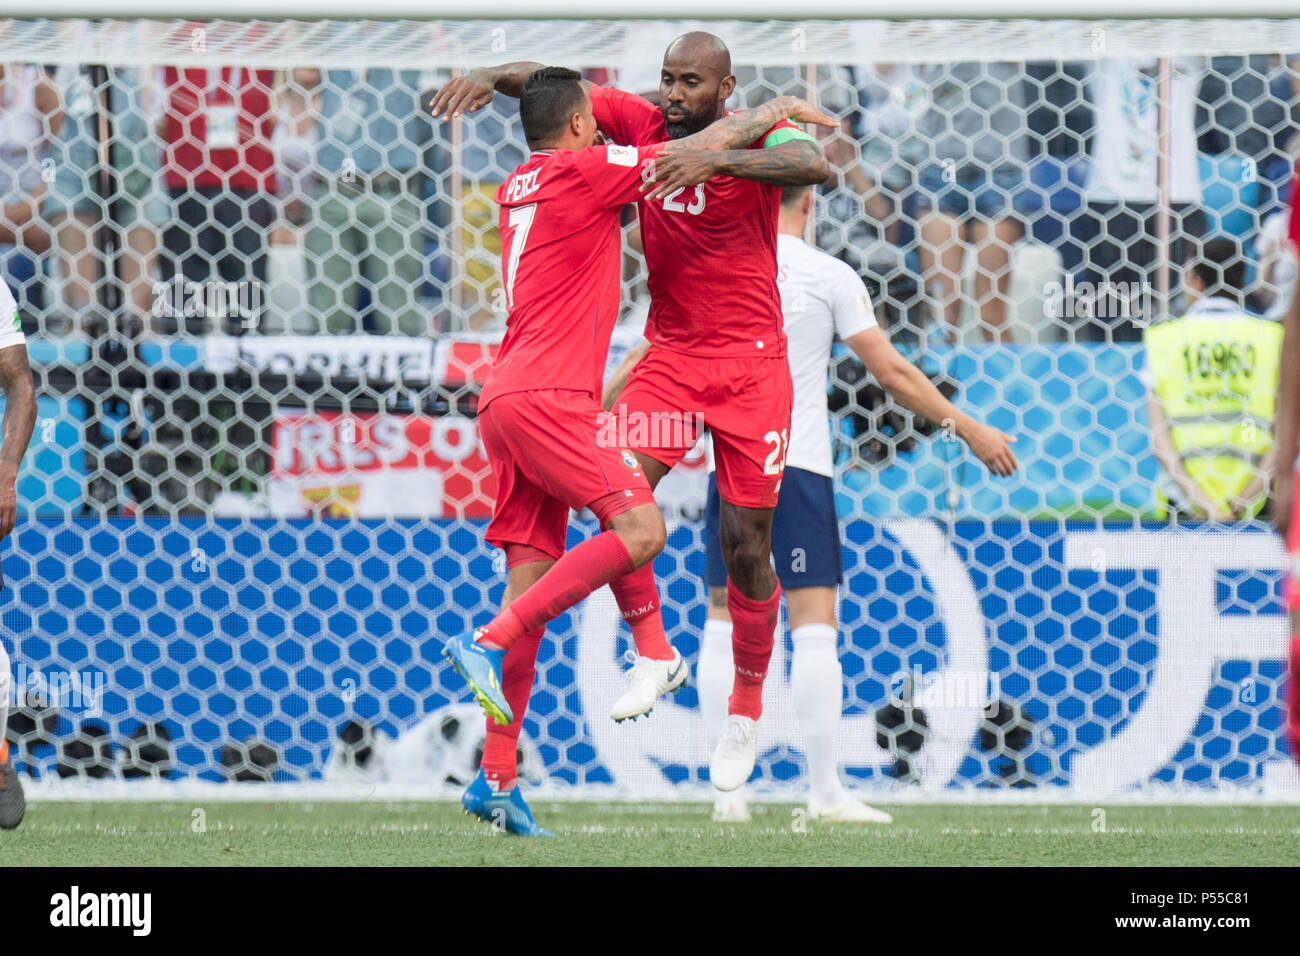 goalkeeper Felipe BALOY (PAN) cheers with Blas PEREZ (PAN) on the only goal for Panama to 6: 1 final score, full figure, England (ENG) - Panama (PAN) 6: 1, preliminary round, Group G, game 30, am 24.06.2018 in Nizhny Novgorod; Football World Cup 2018 in Russia from 14.06. - 15.07.2018. | usage worldwide Stock Photo